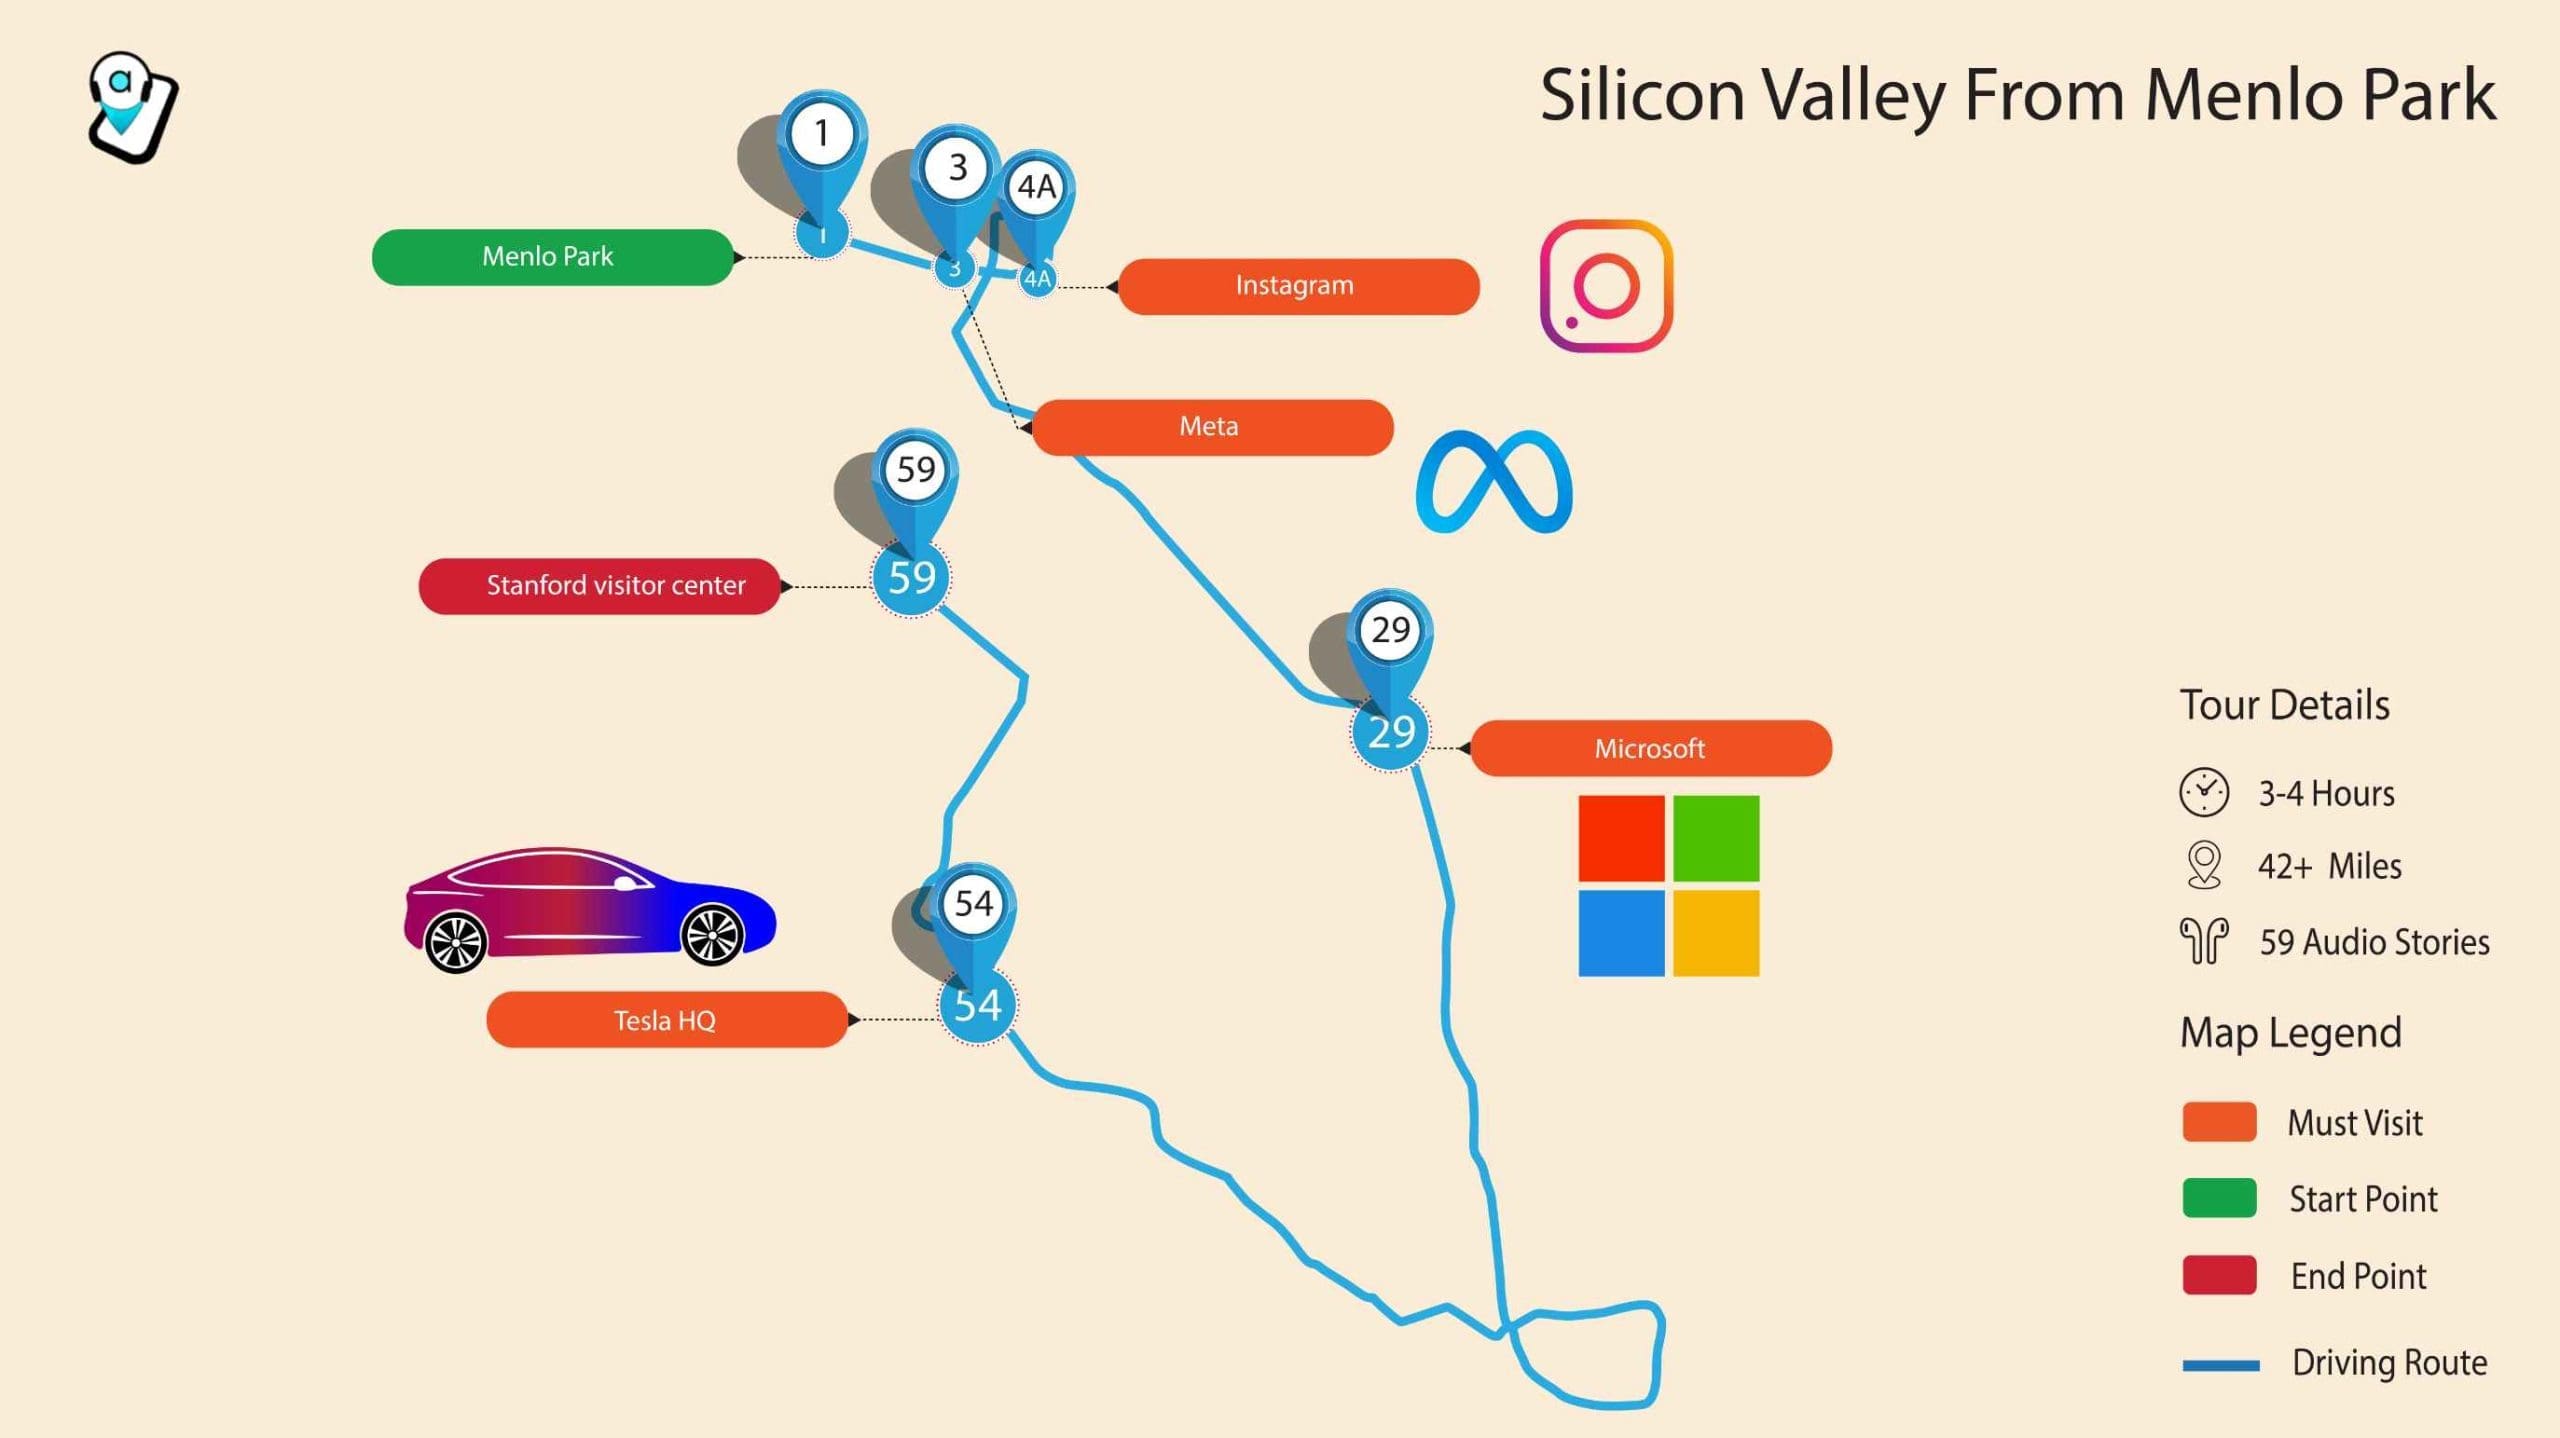 Visit Silicon Valley